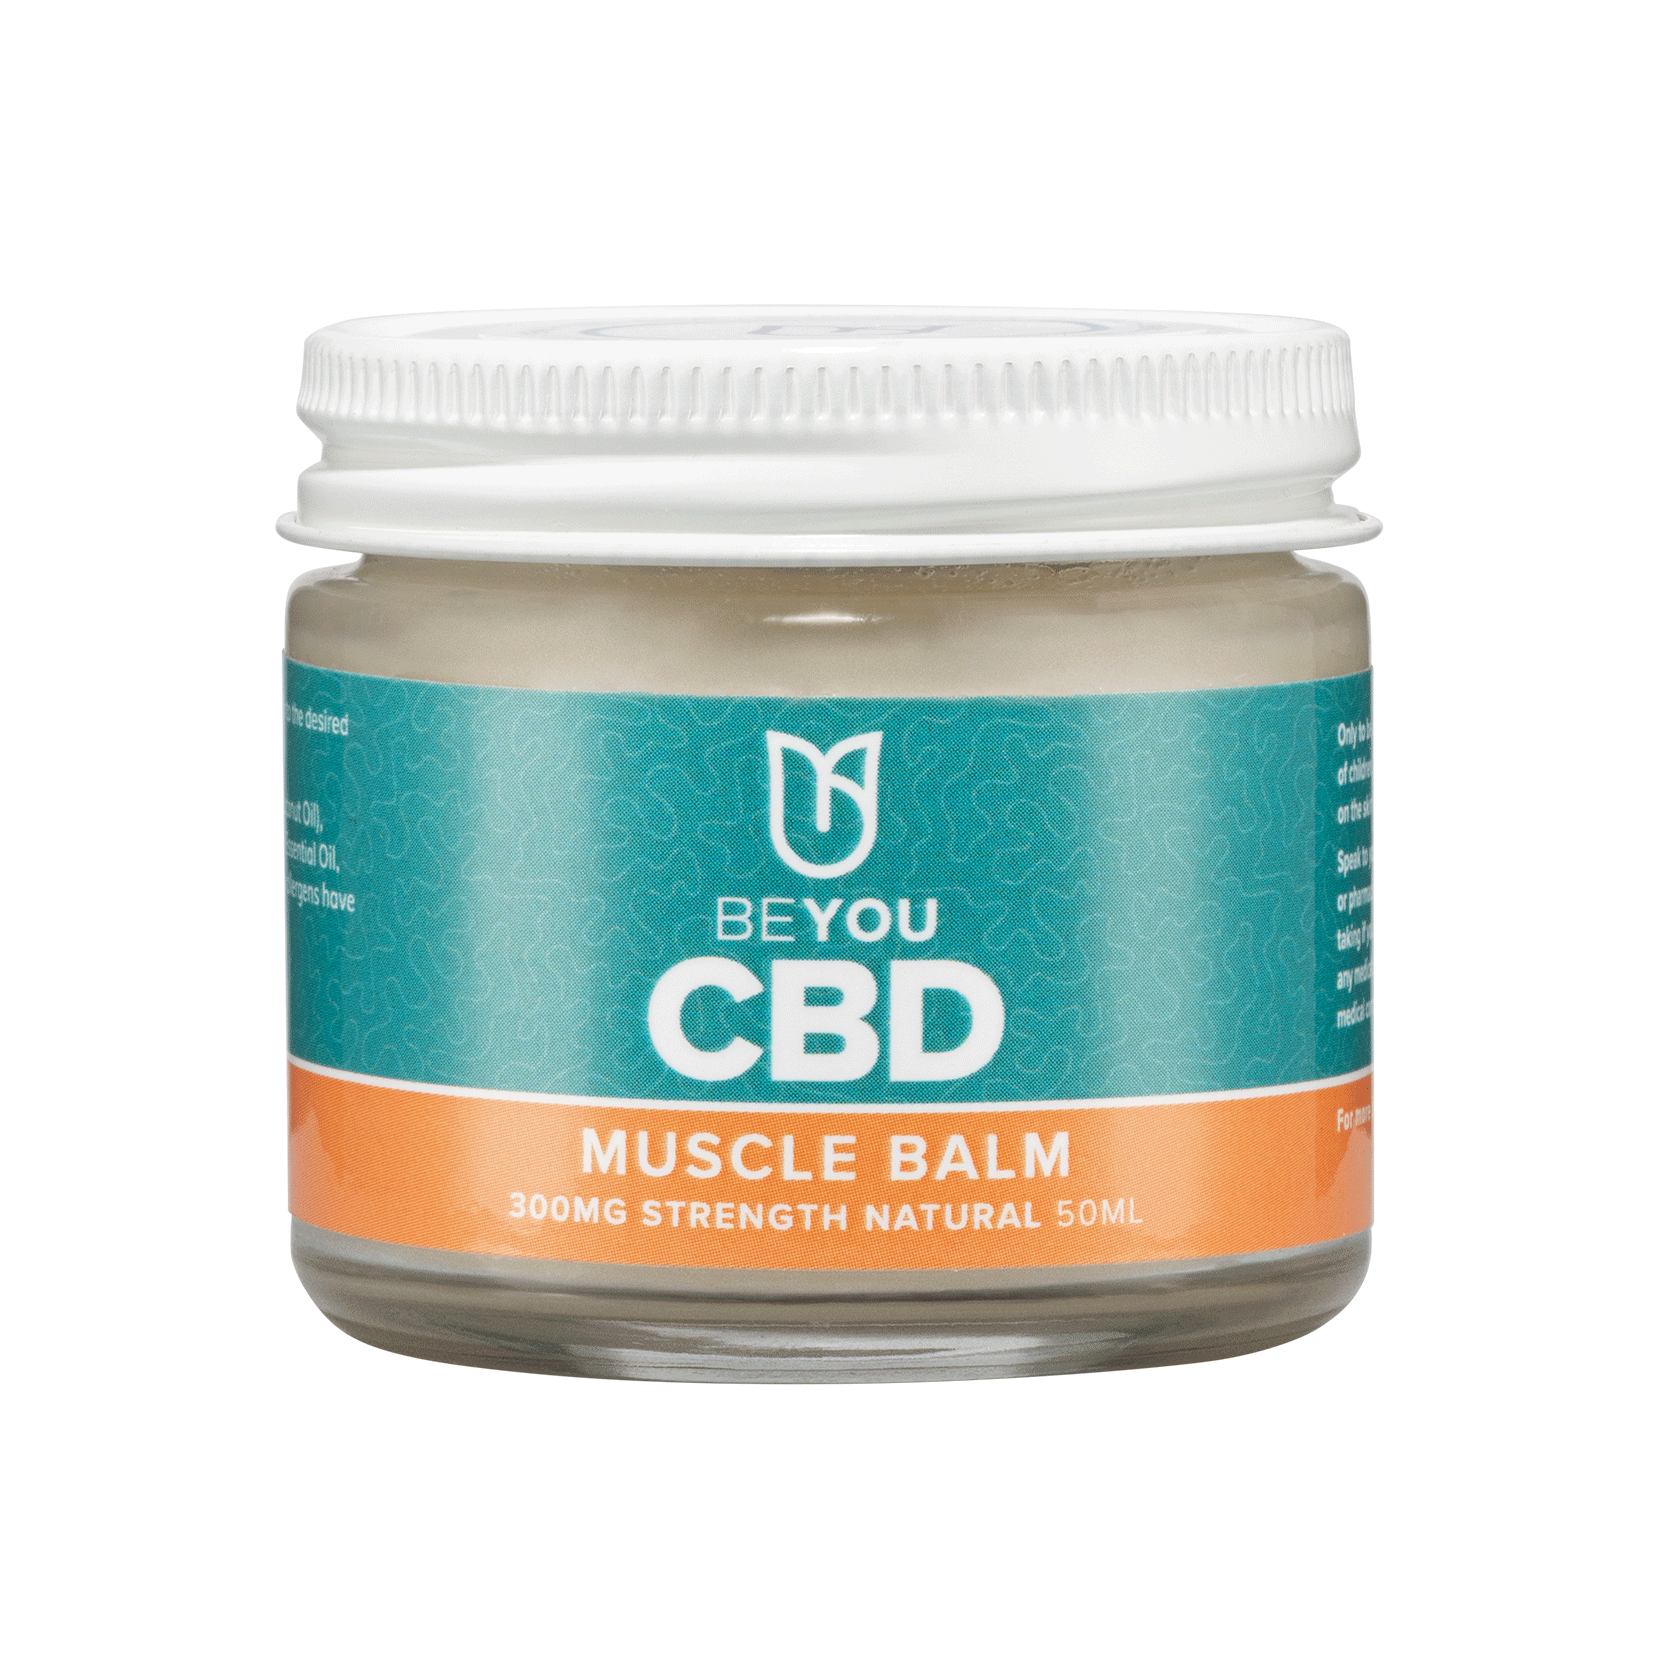 award winning CBD muscle balm designed for aches and pains giving you CBD benefits through a balm